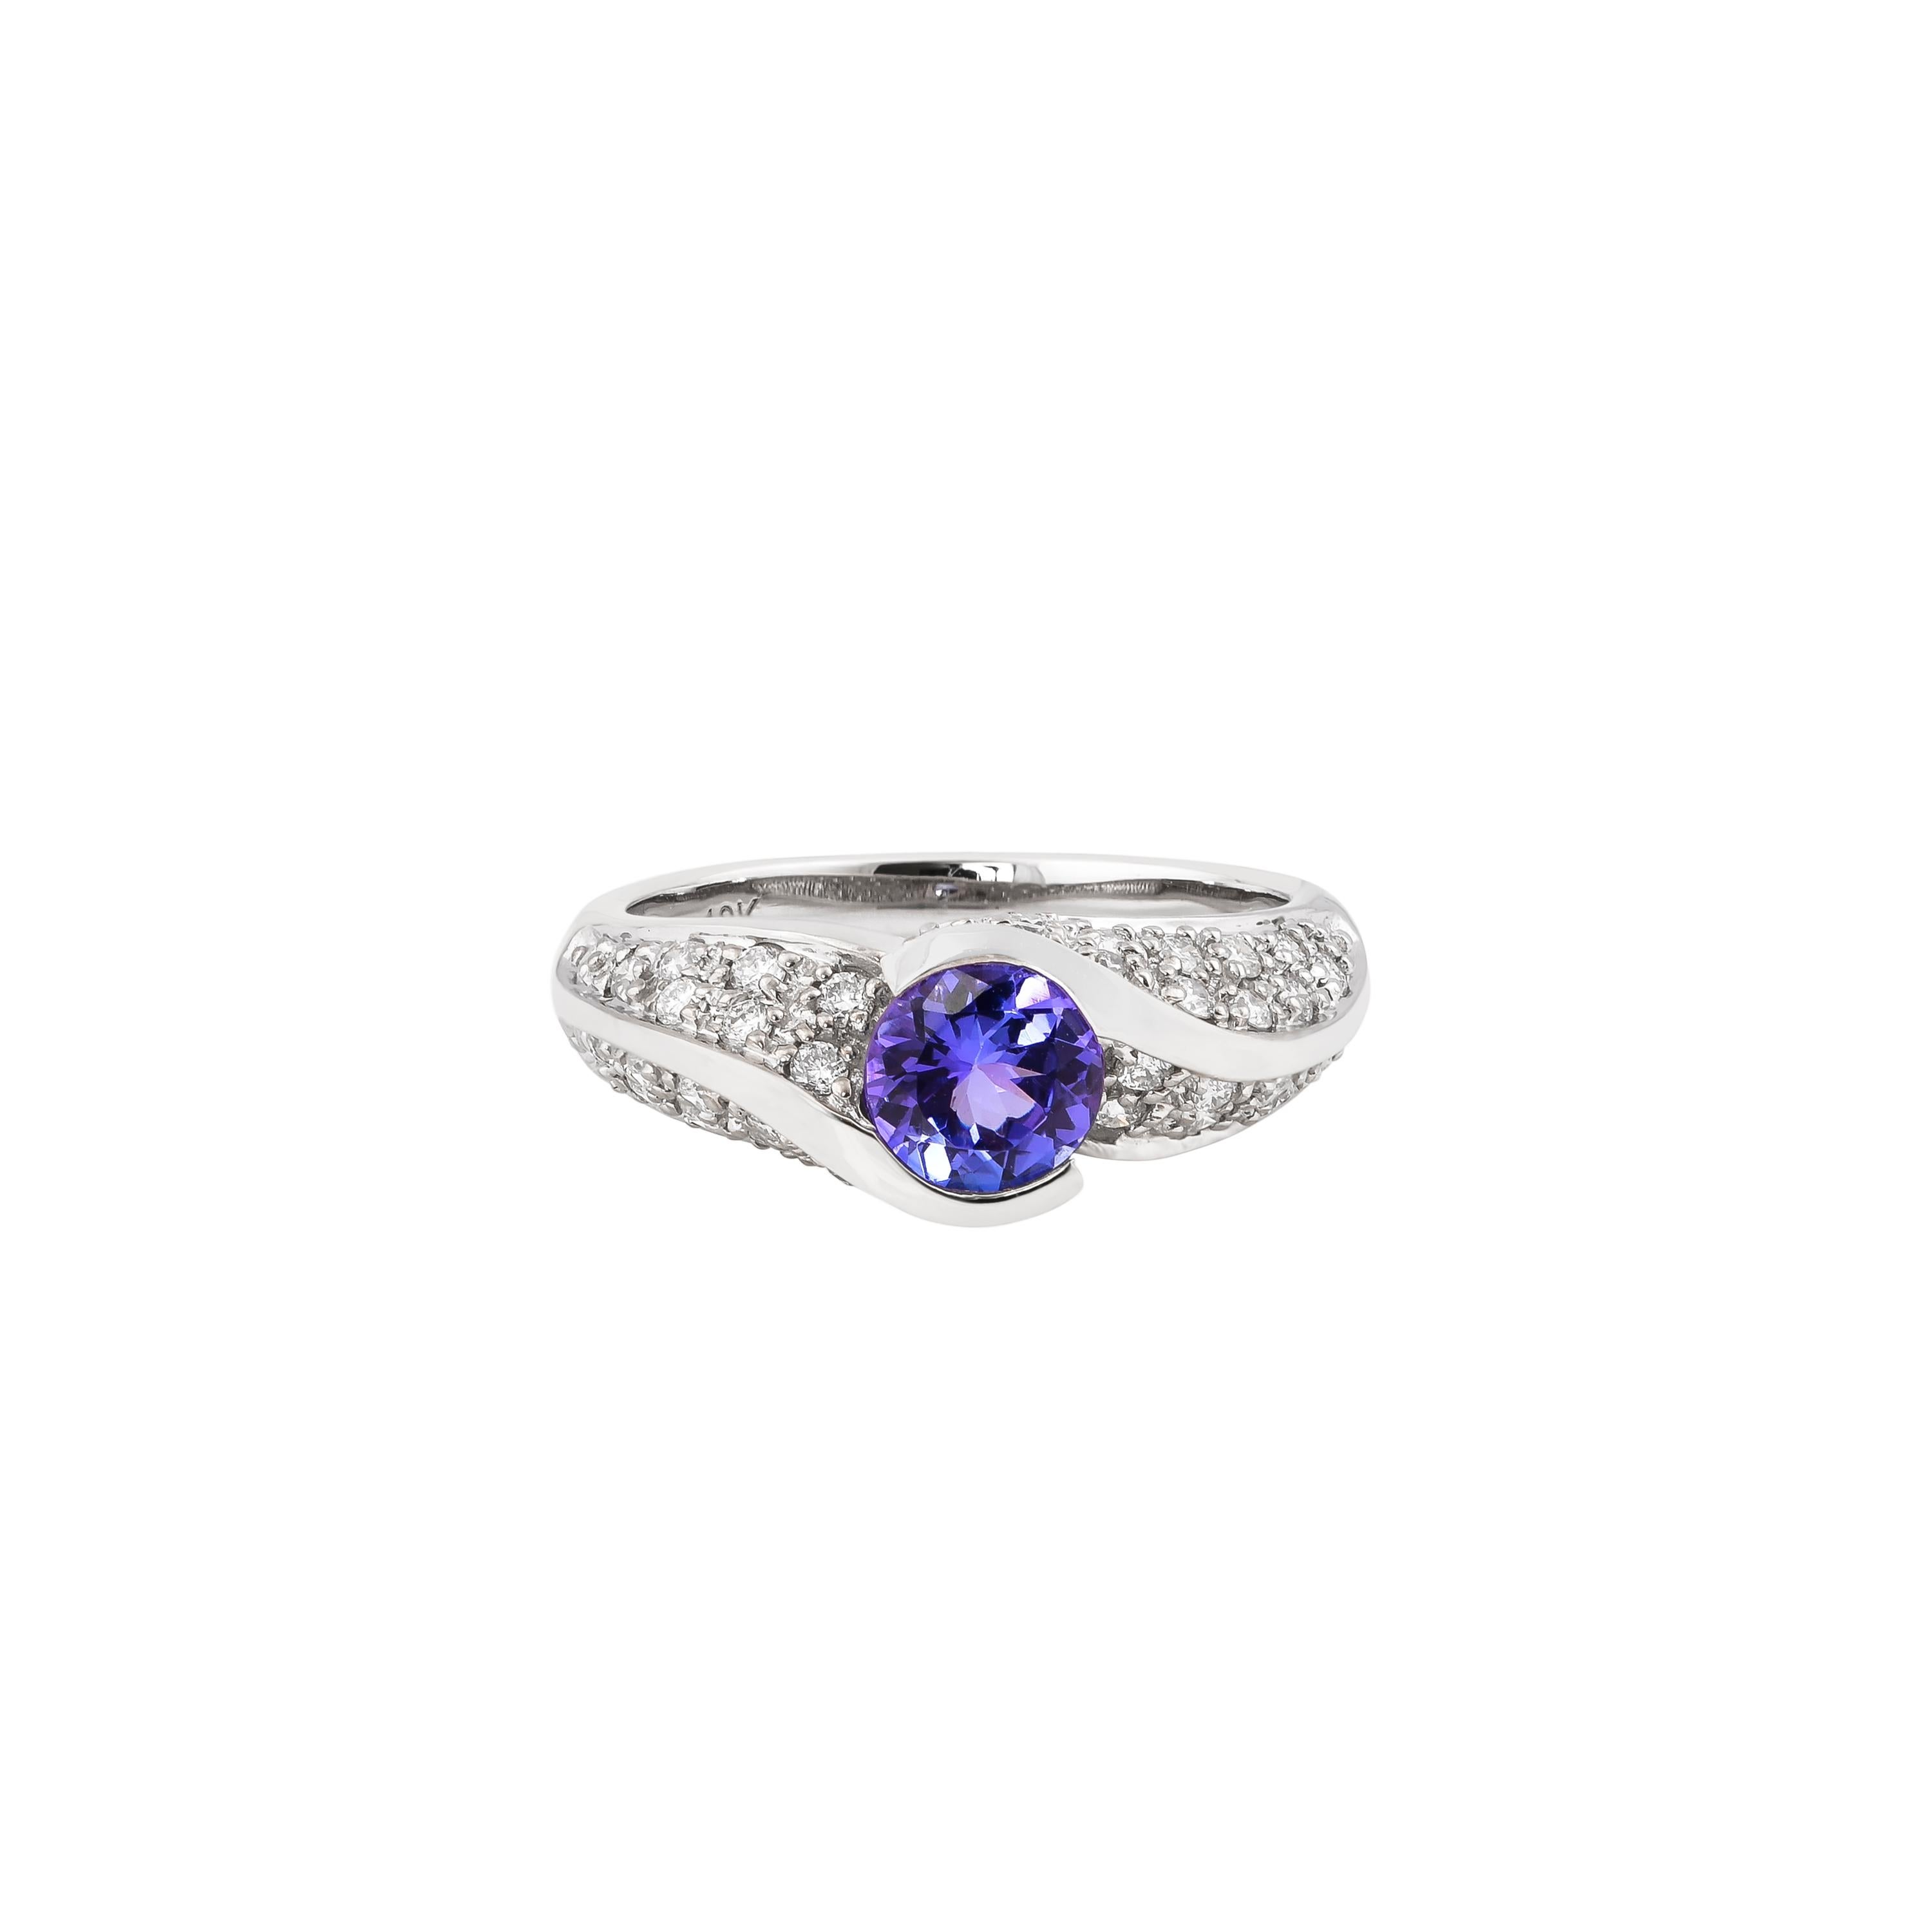 Contemporary 0.74 Carat Tanzanite Ring in 18 Karat White Gold with Diamond. For Sale